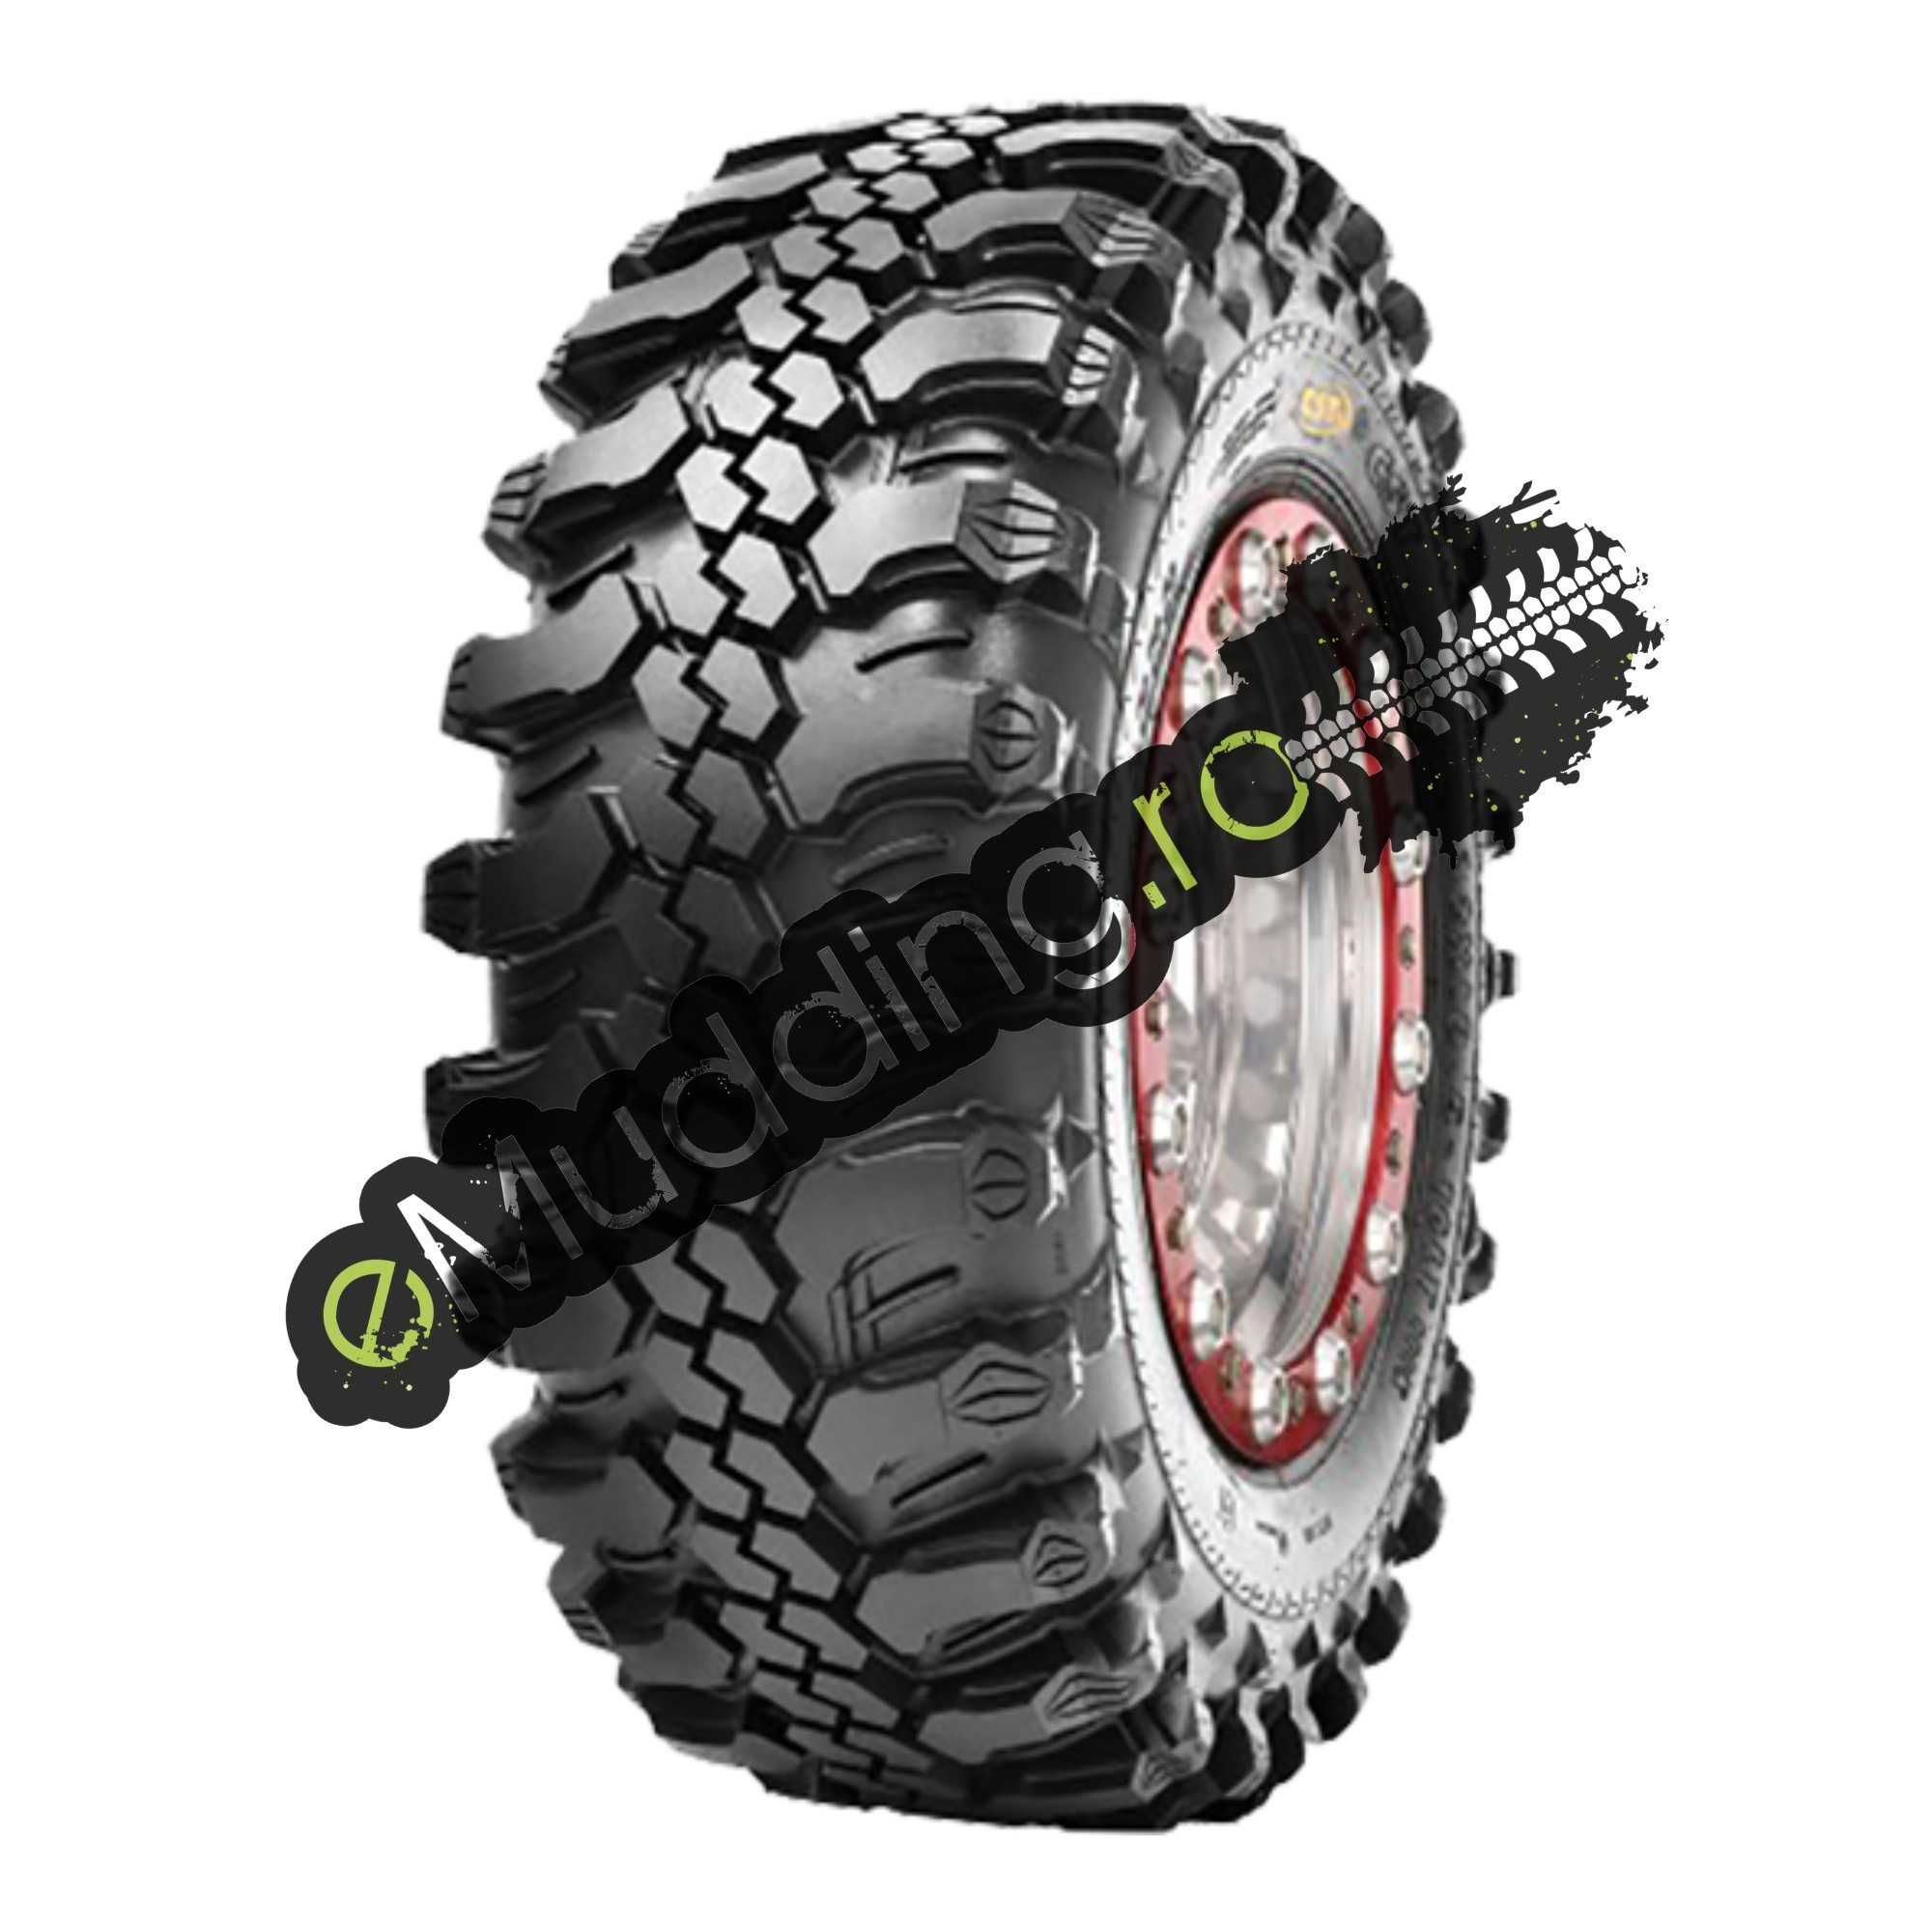 31/10.5 R15 | 275/75 R15 CST by MAXXIS C888 Anvelopa OFF-ROAD